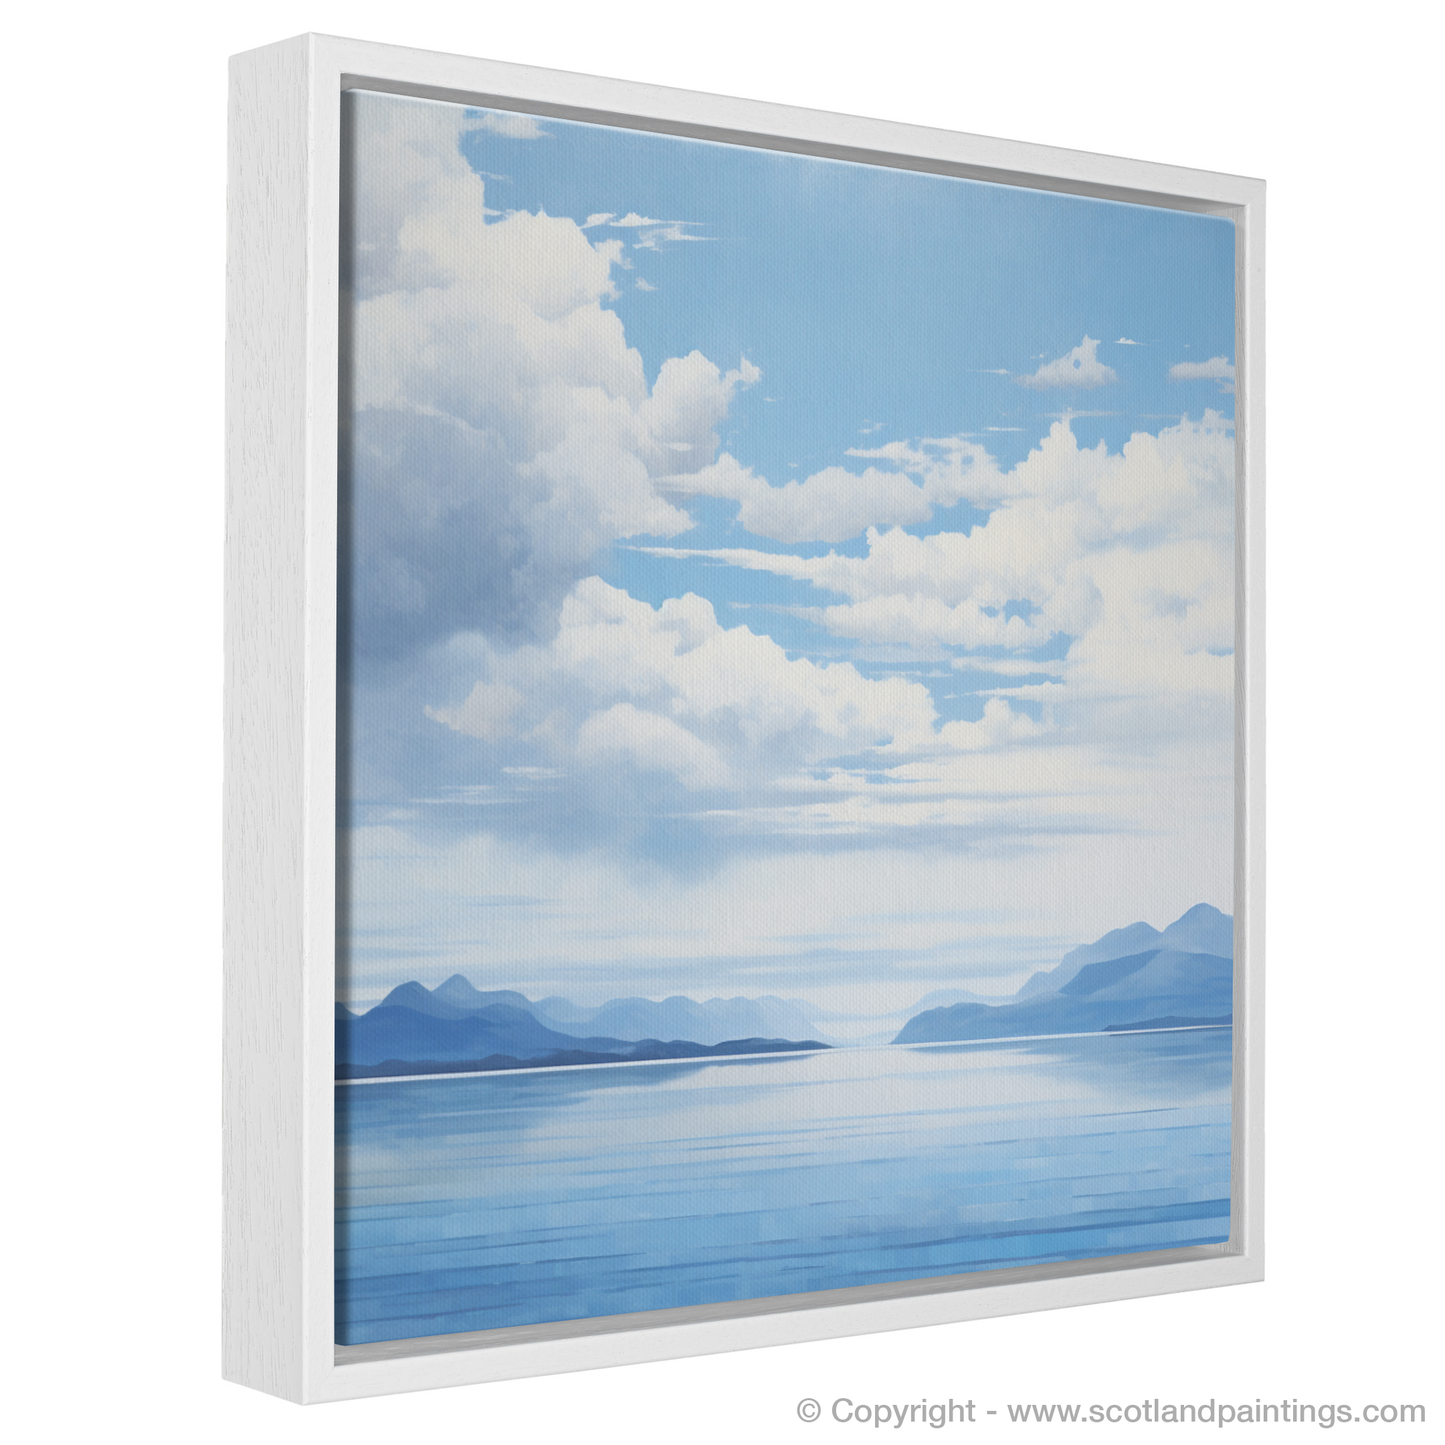 Painting and Art Print of A huge sky above Loch Lomond entitled "Serenity of Loch Lomond Skies".